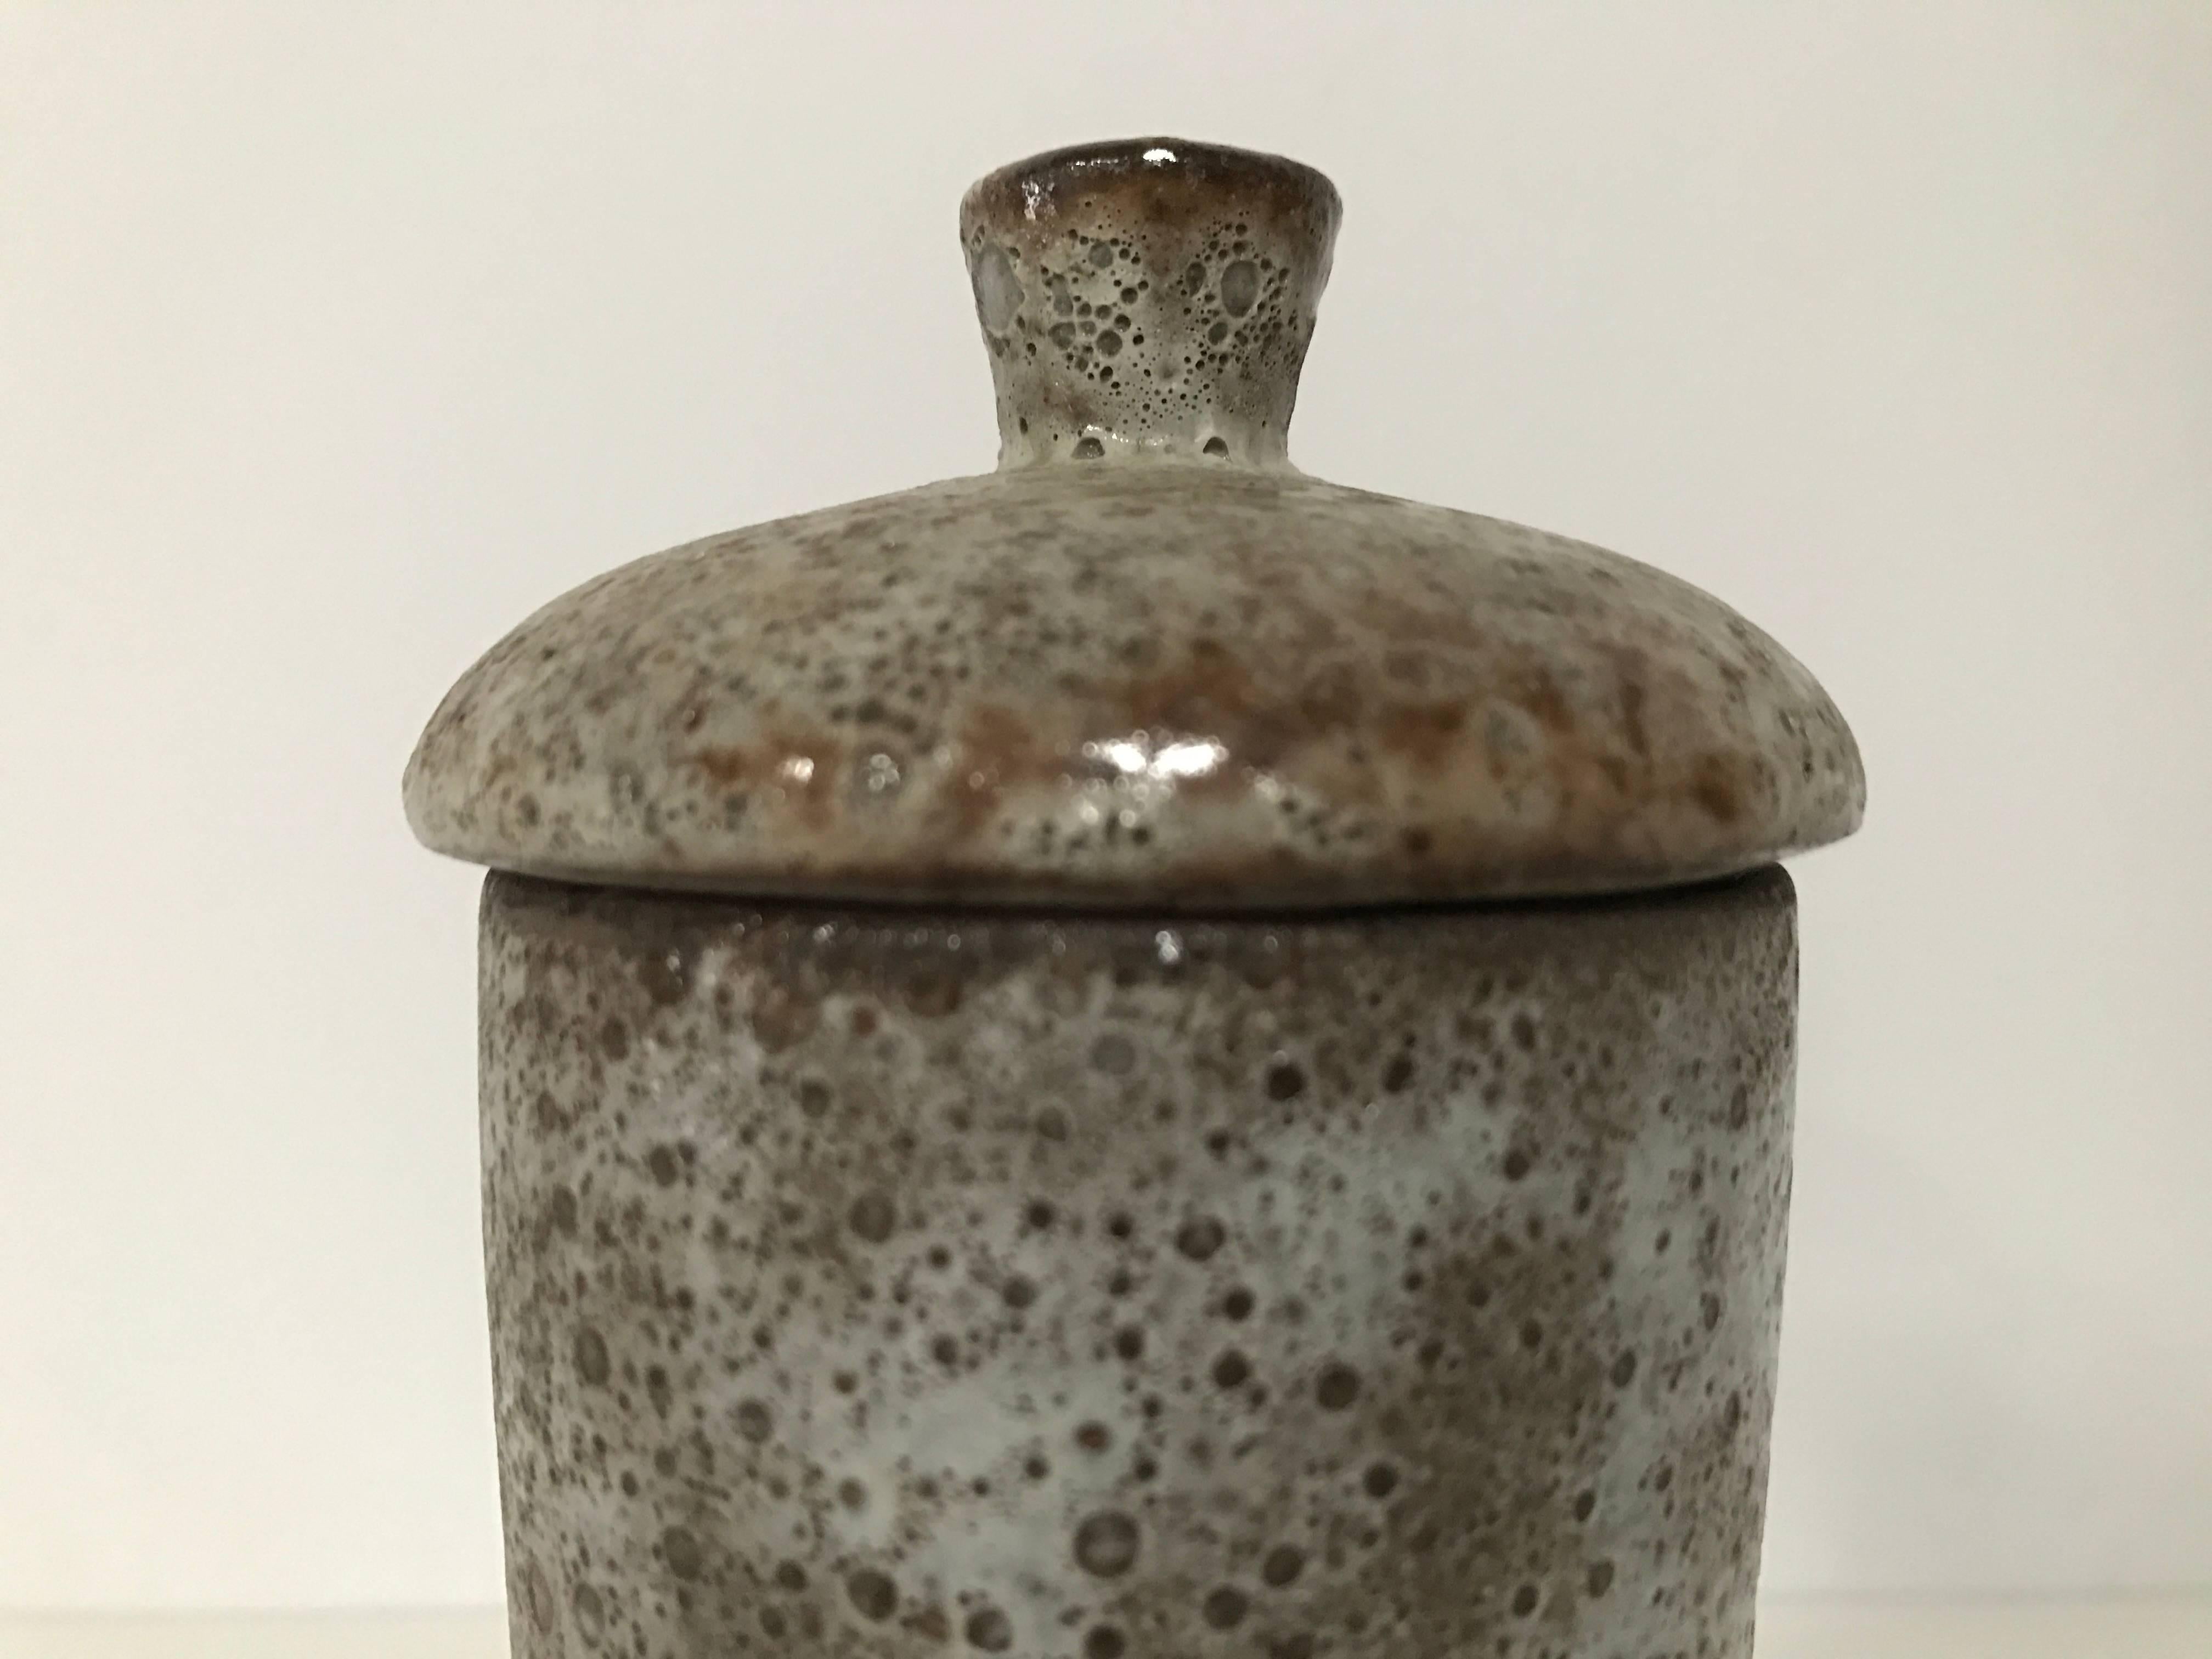 Beautiful modernist lidded ceramic vessel with a volcanic glaze by Alexandre Kostanda, Vallauris France, circa 1950s. Signed.